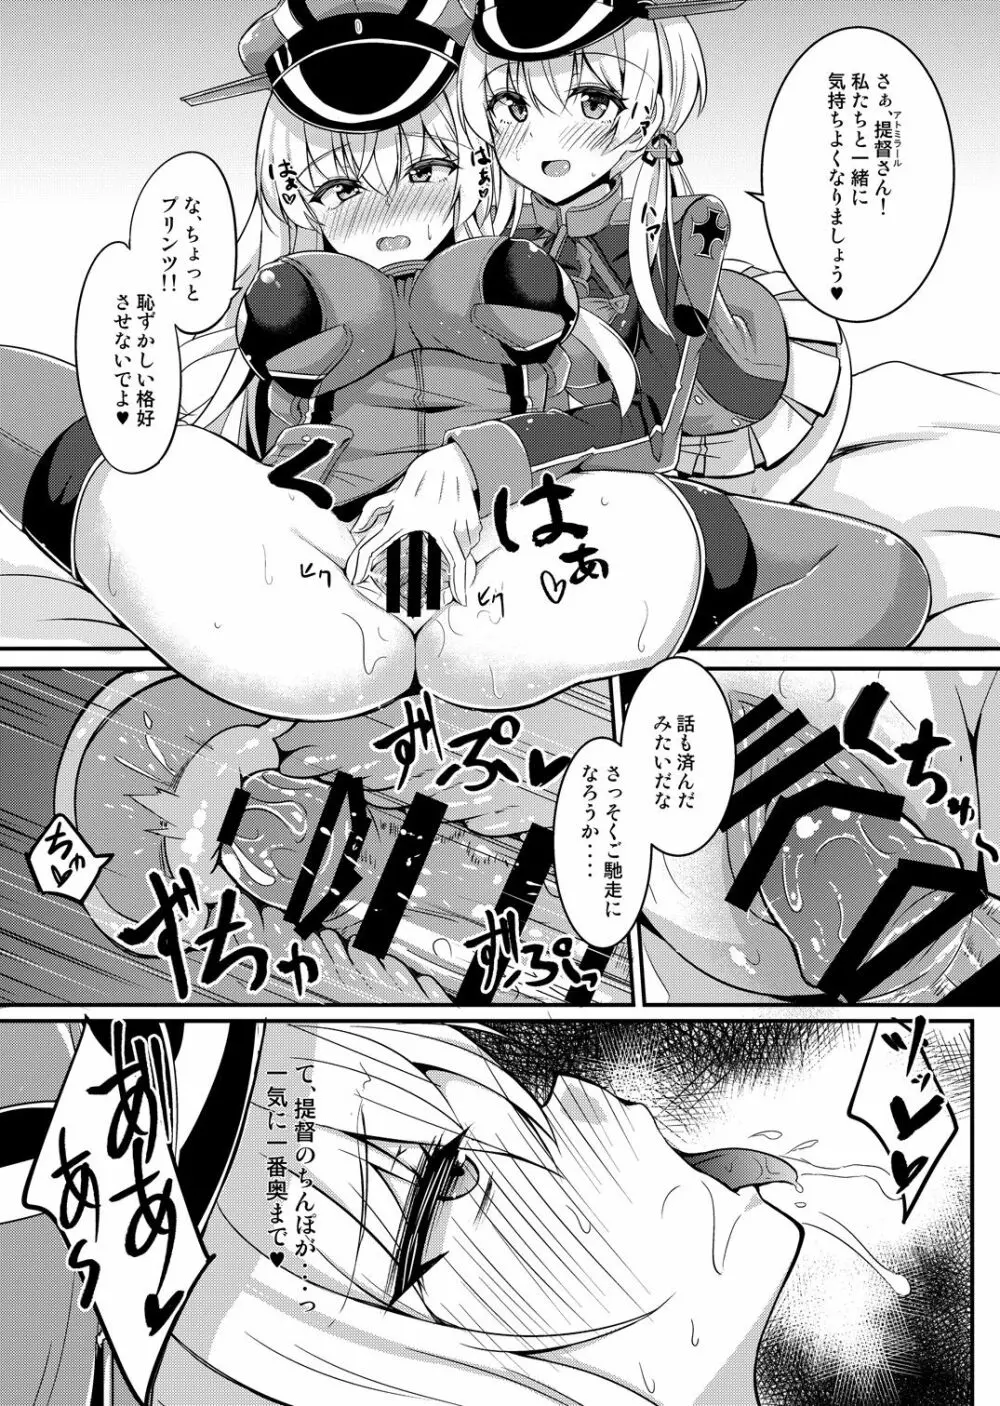 Daily life of admiral and two German ship 提督と二人の日常 16ページ